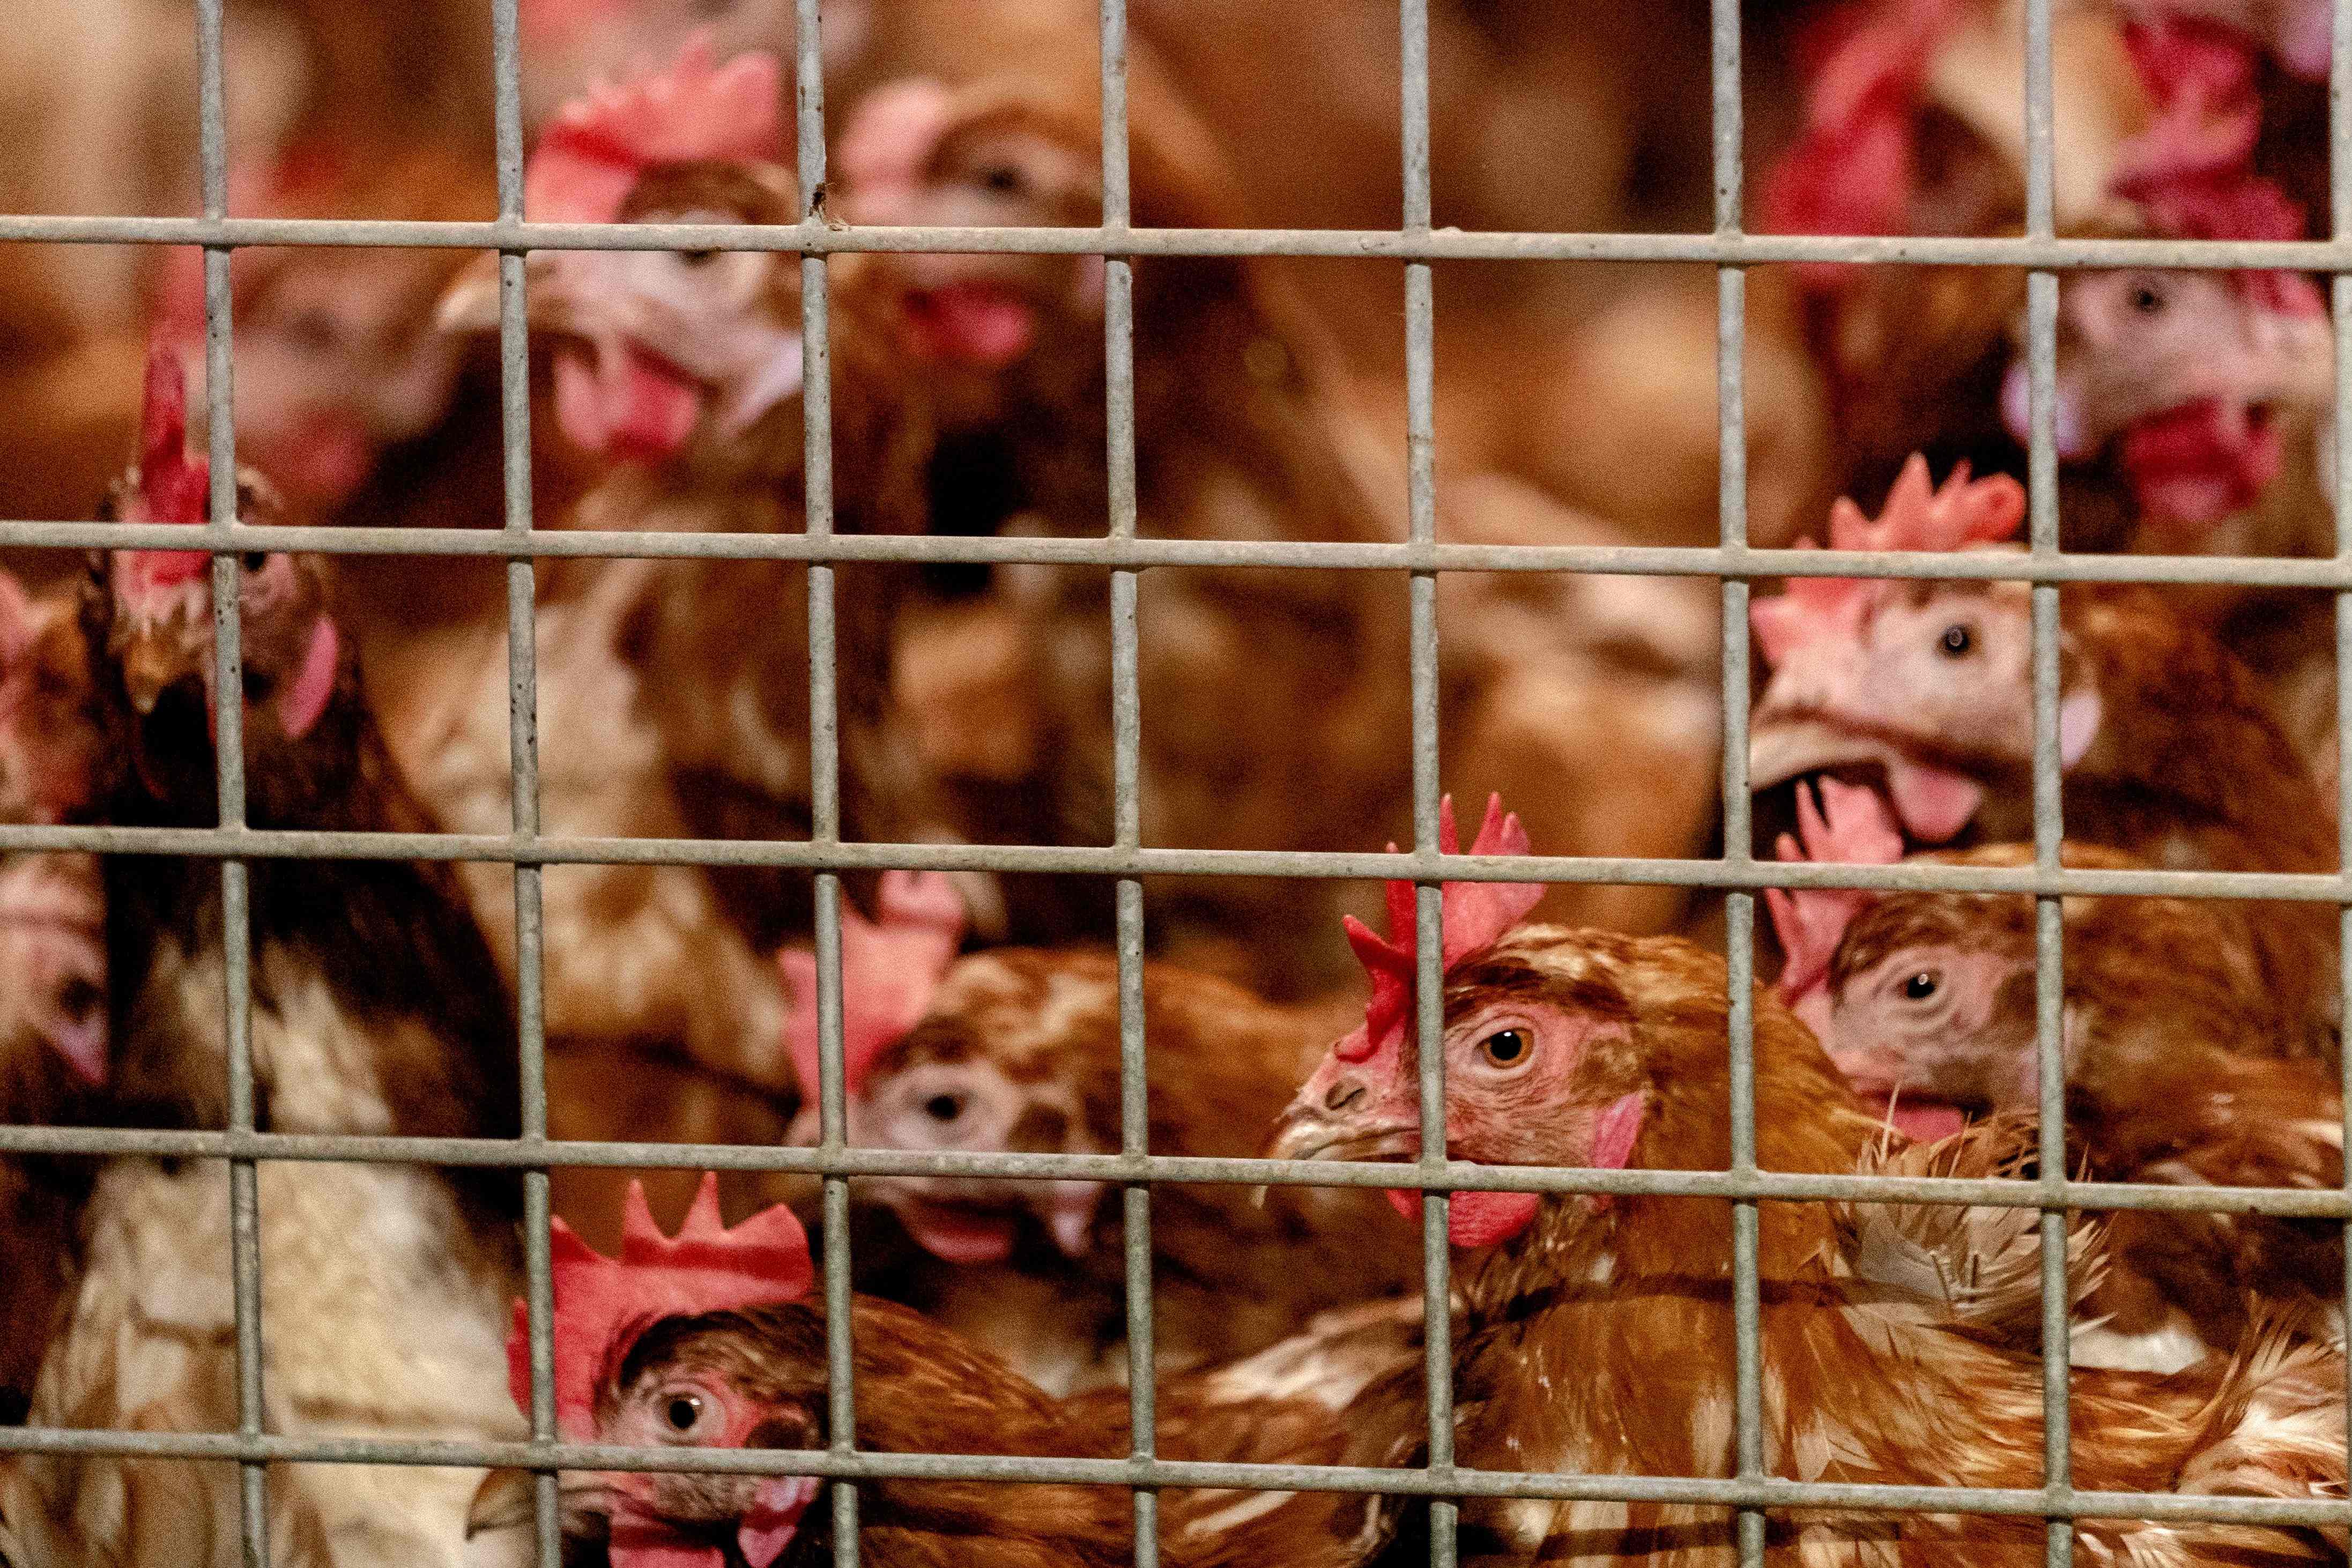 Chickens tested positive for H5N8 strain of the Avian Influenza